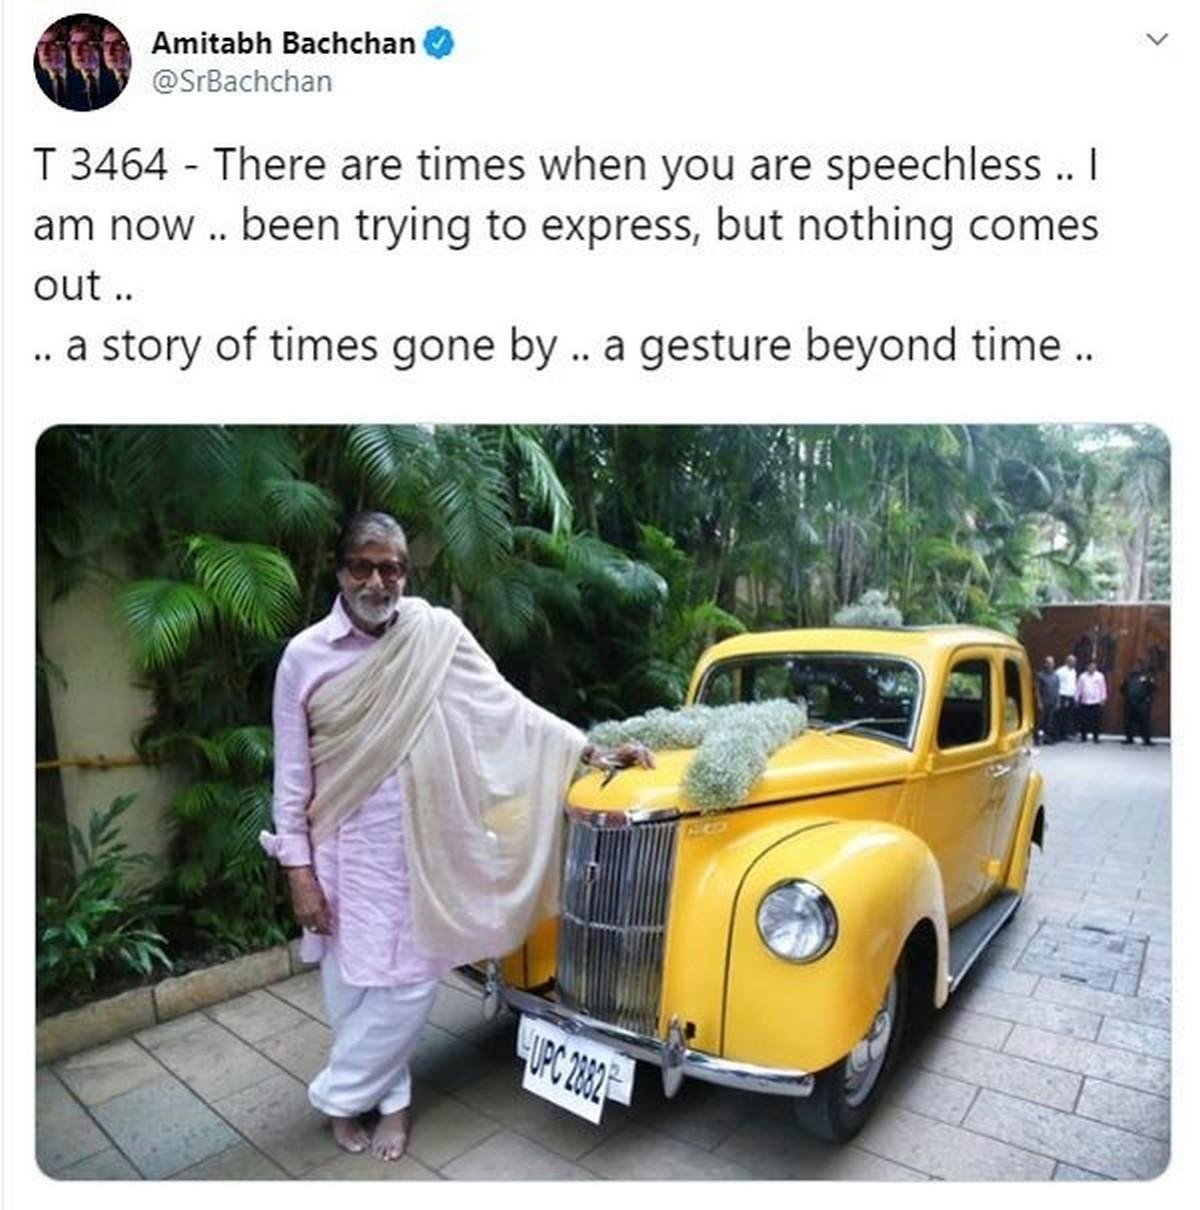 After Rolls Royce and Land Cruiser, Amitabh Bachchan Adds a Vintage Car to his Garage